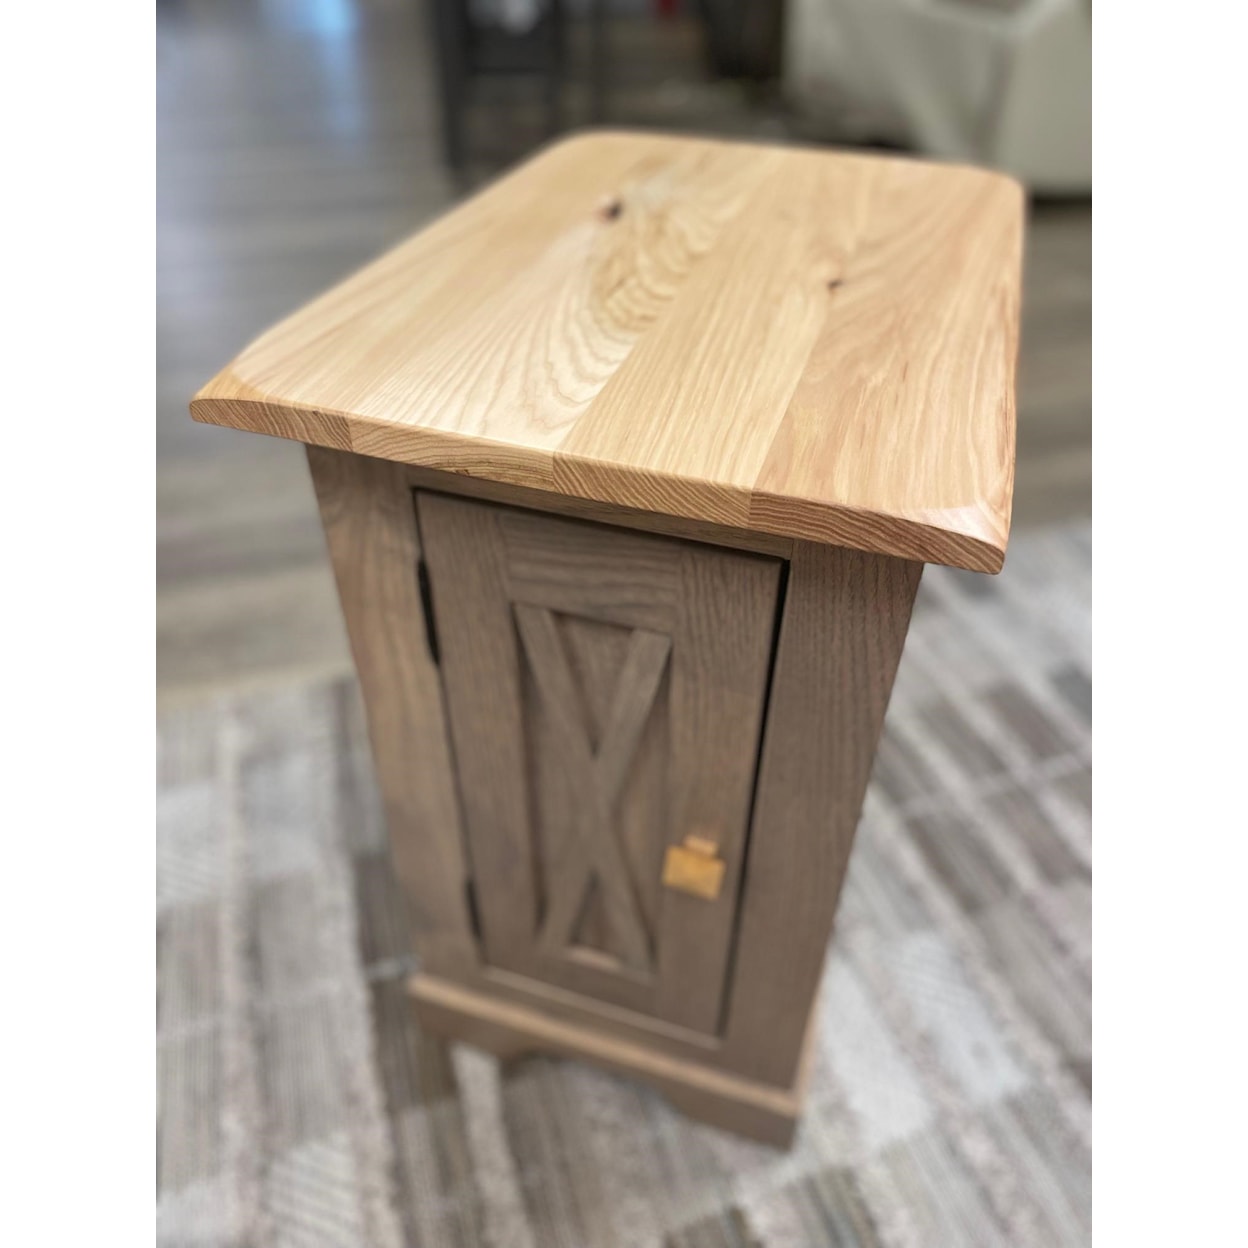 Wooden Design 277 Chairside Cabinet Table